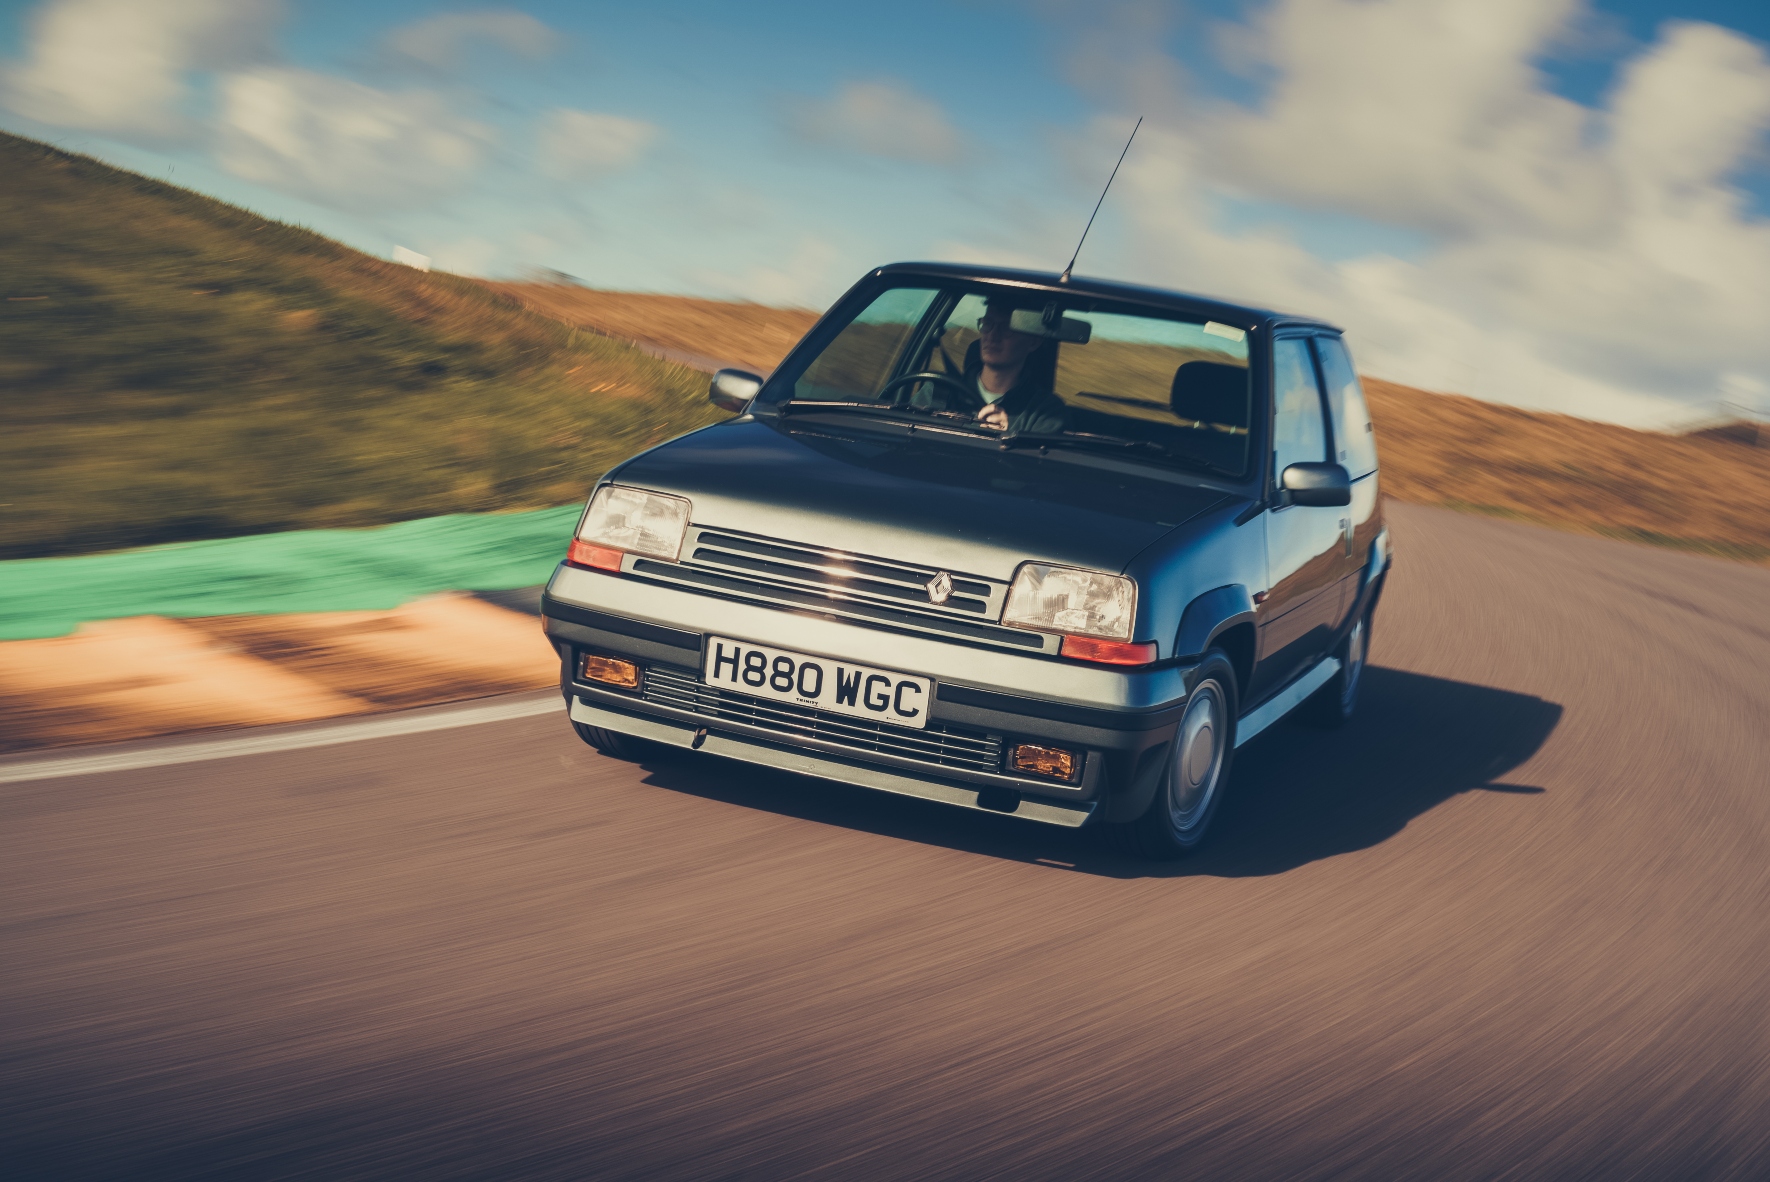 Hot hatch highs and lows – by the writers that tested them when new